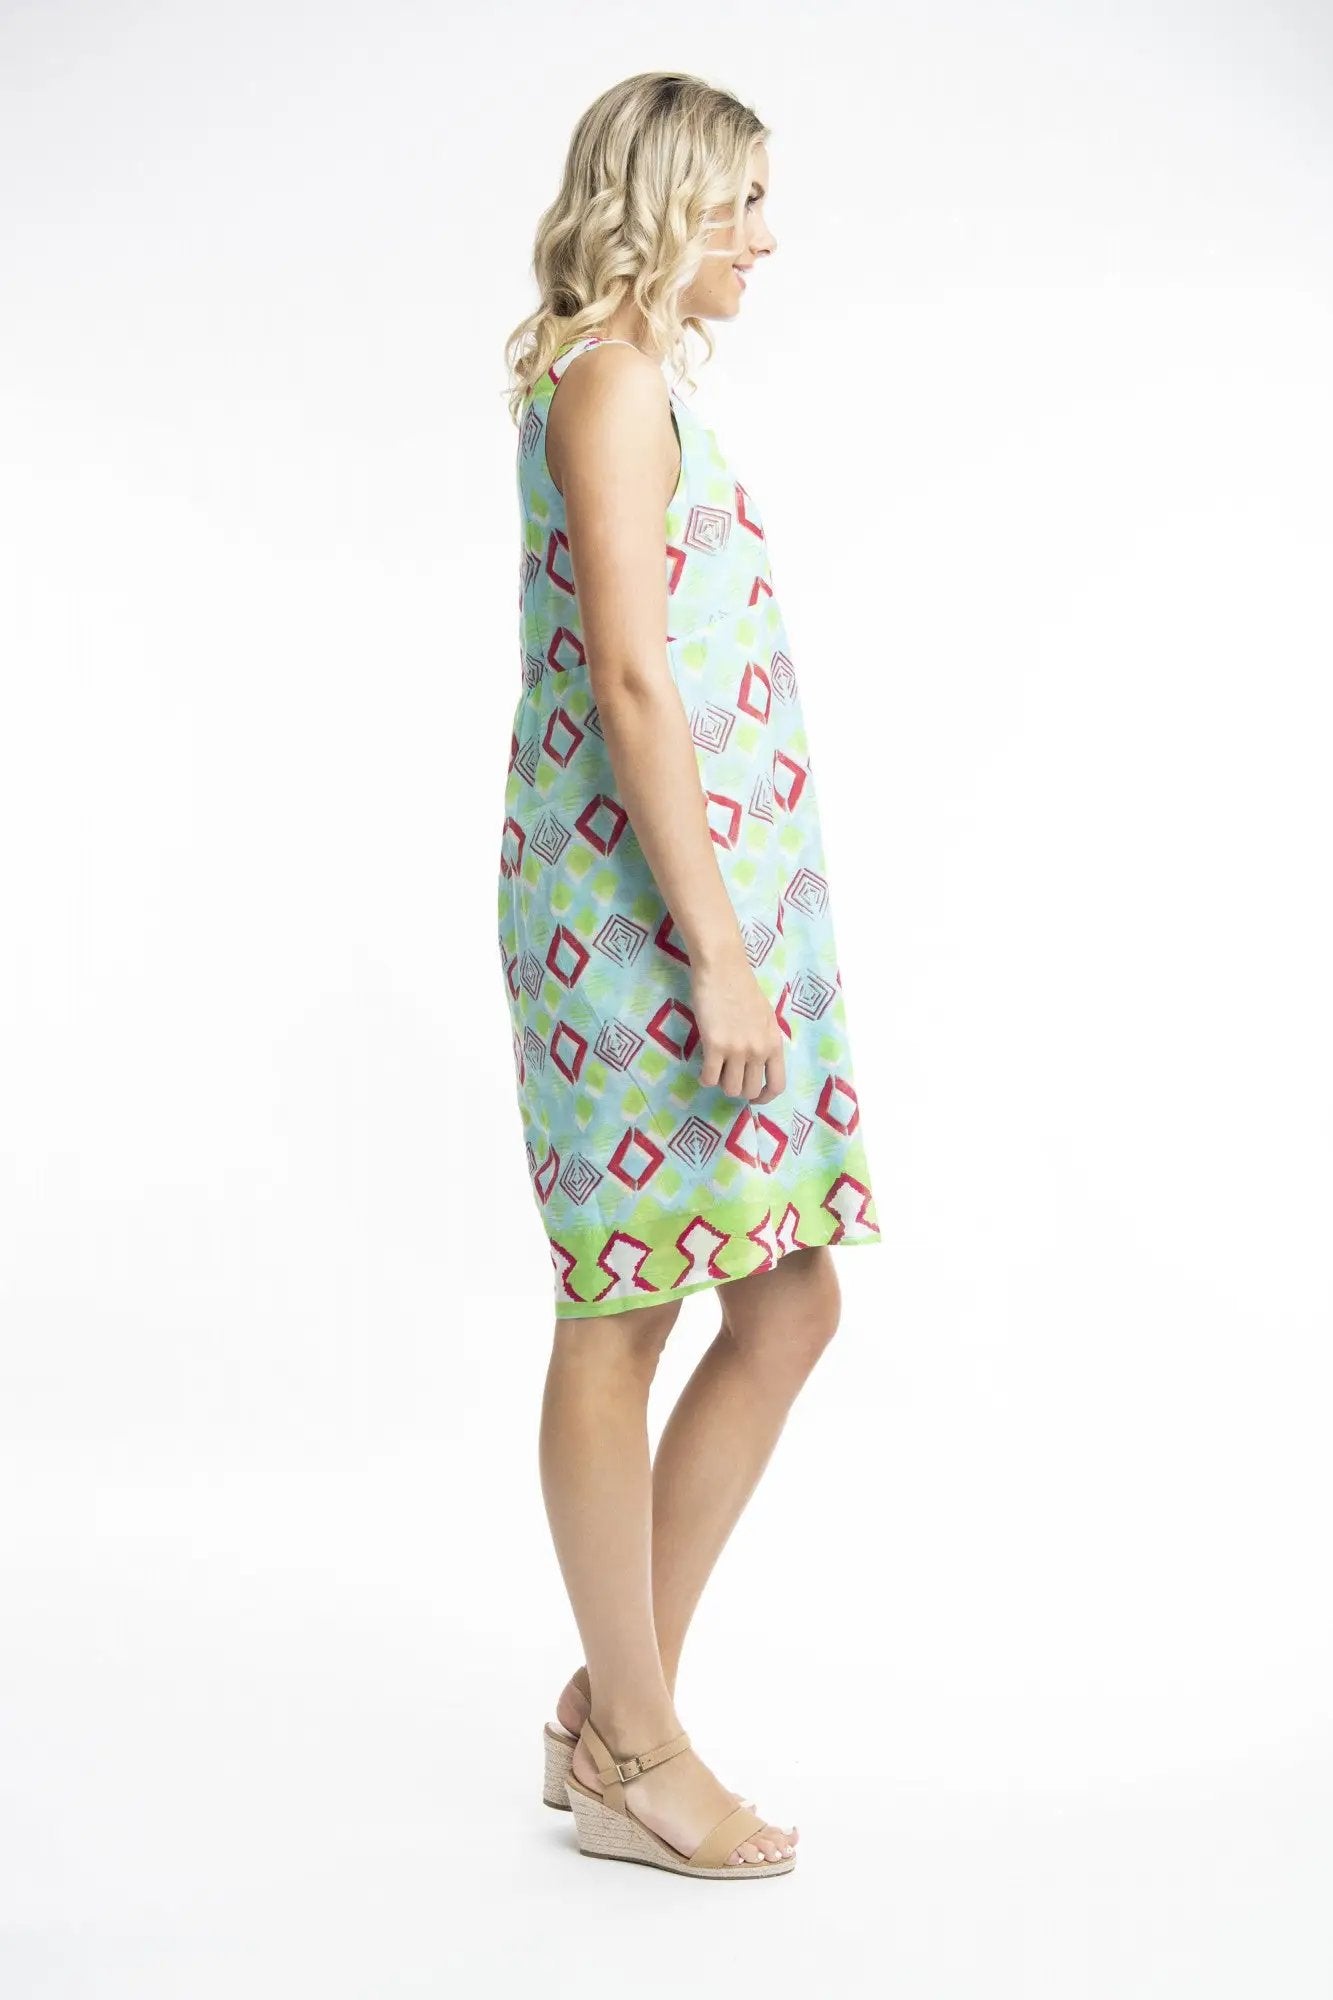 A woman smiling while posing in a Zio Turq Dress Reversible Sleeveless by Orientique on a white background.